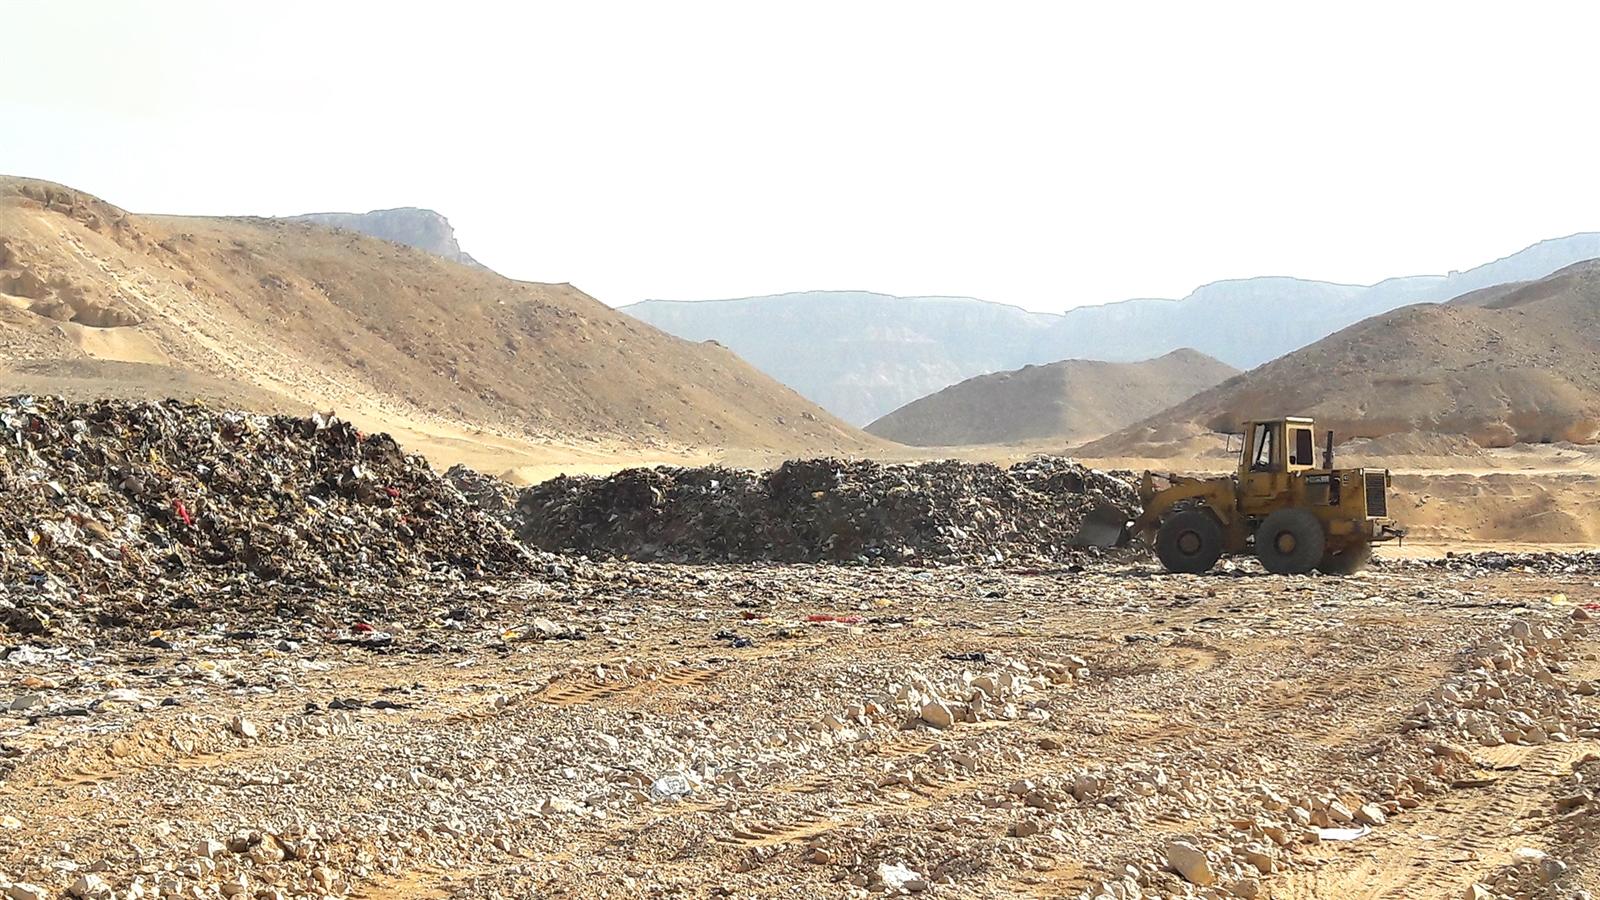 solid_waste_egypt_hi_16 to 9